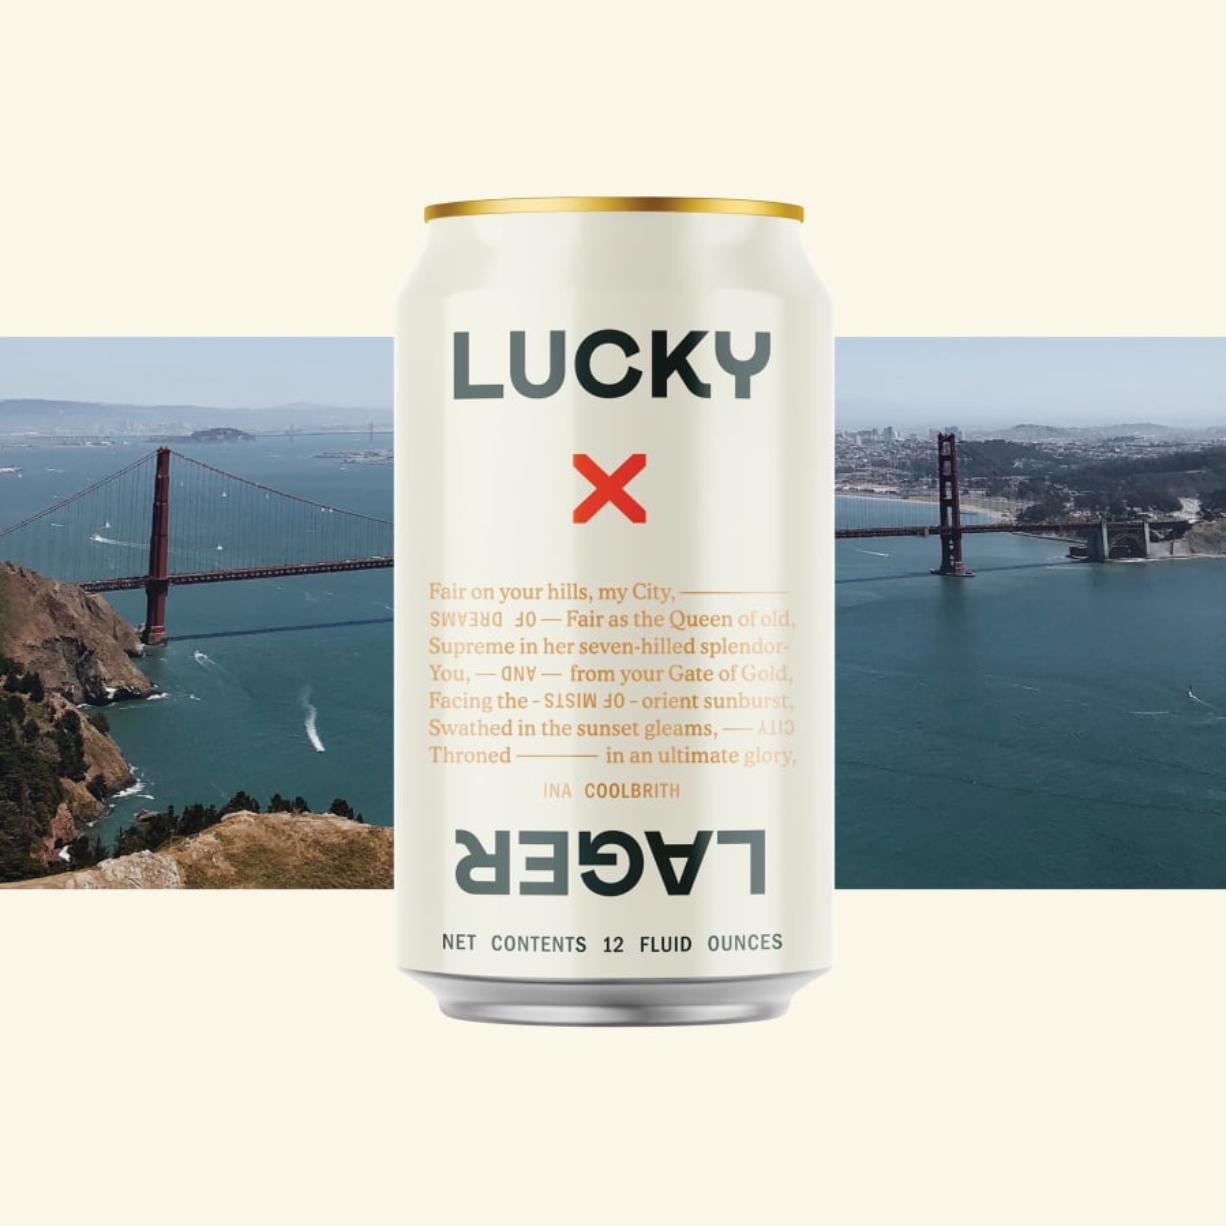 Lucky Lager started in San Francisco in 1934, just a year after the end of Prohibition. Its Vancouver production began in 1950 and ended in 1985.